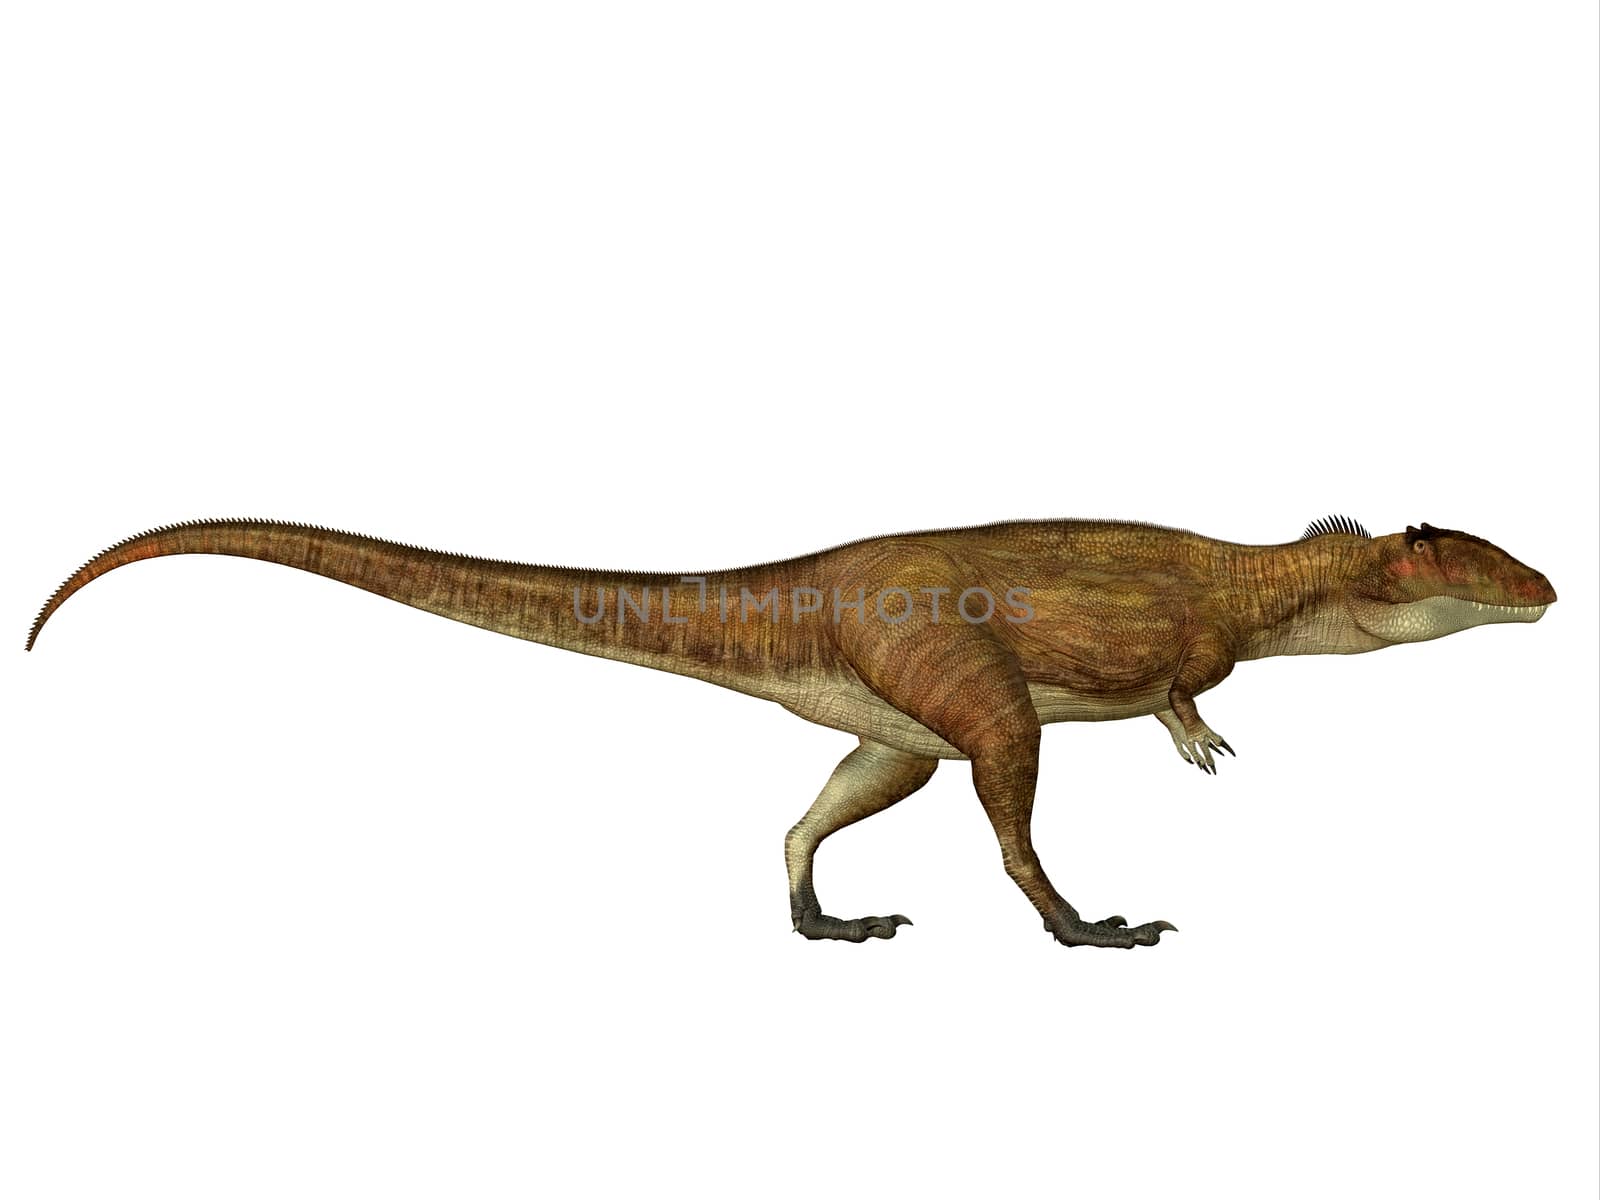 Carcharodontosaurus was a carnivorous theropod dinosaur that lived in Sahara, Africa during the Cretaceous Period.